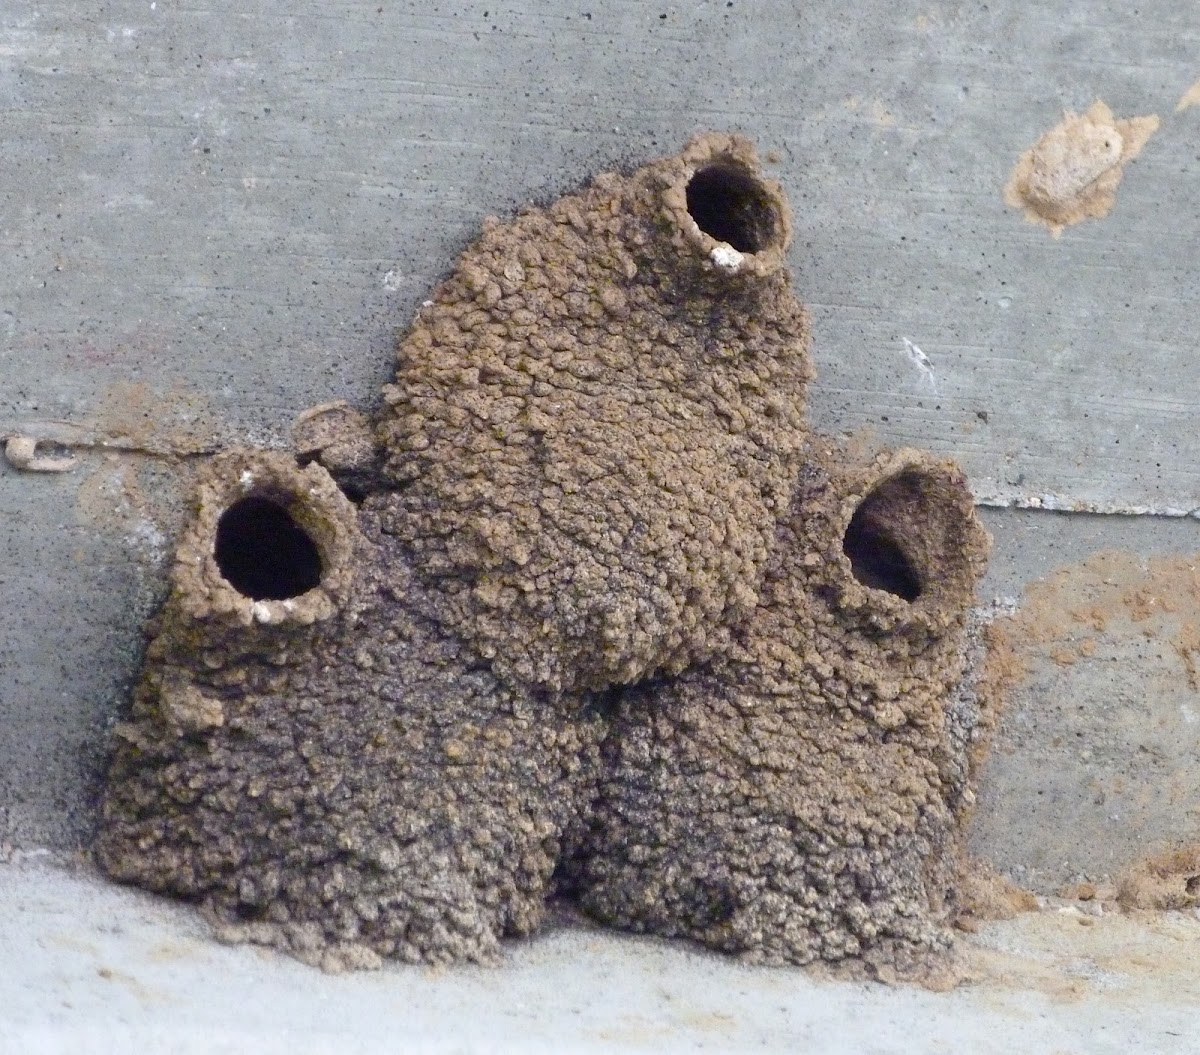 Cliff swallow nests